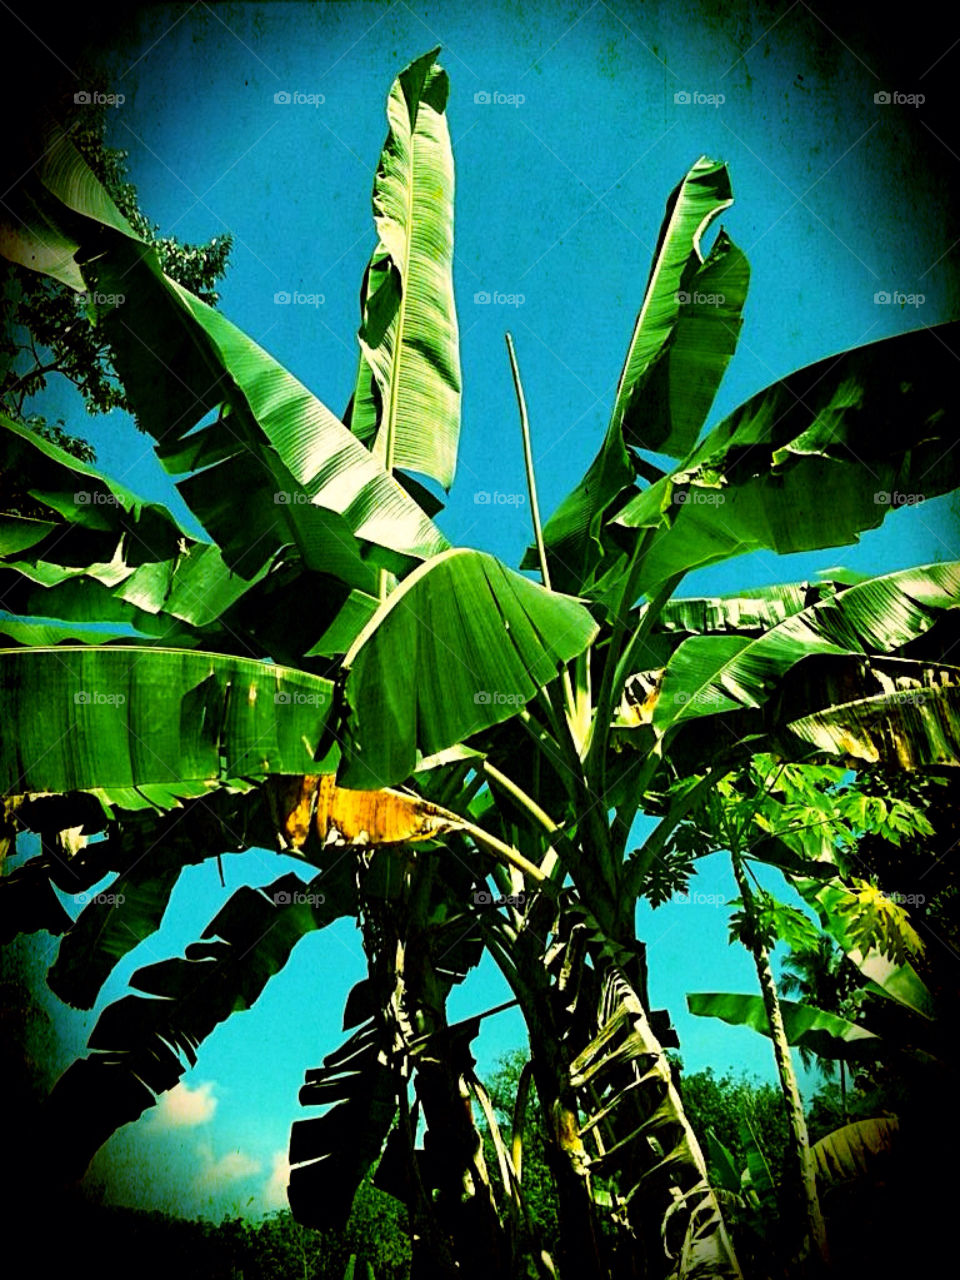 leaf banana orchard old picture by studio69